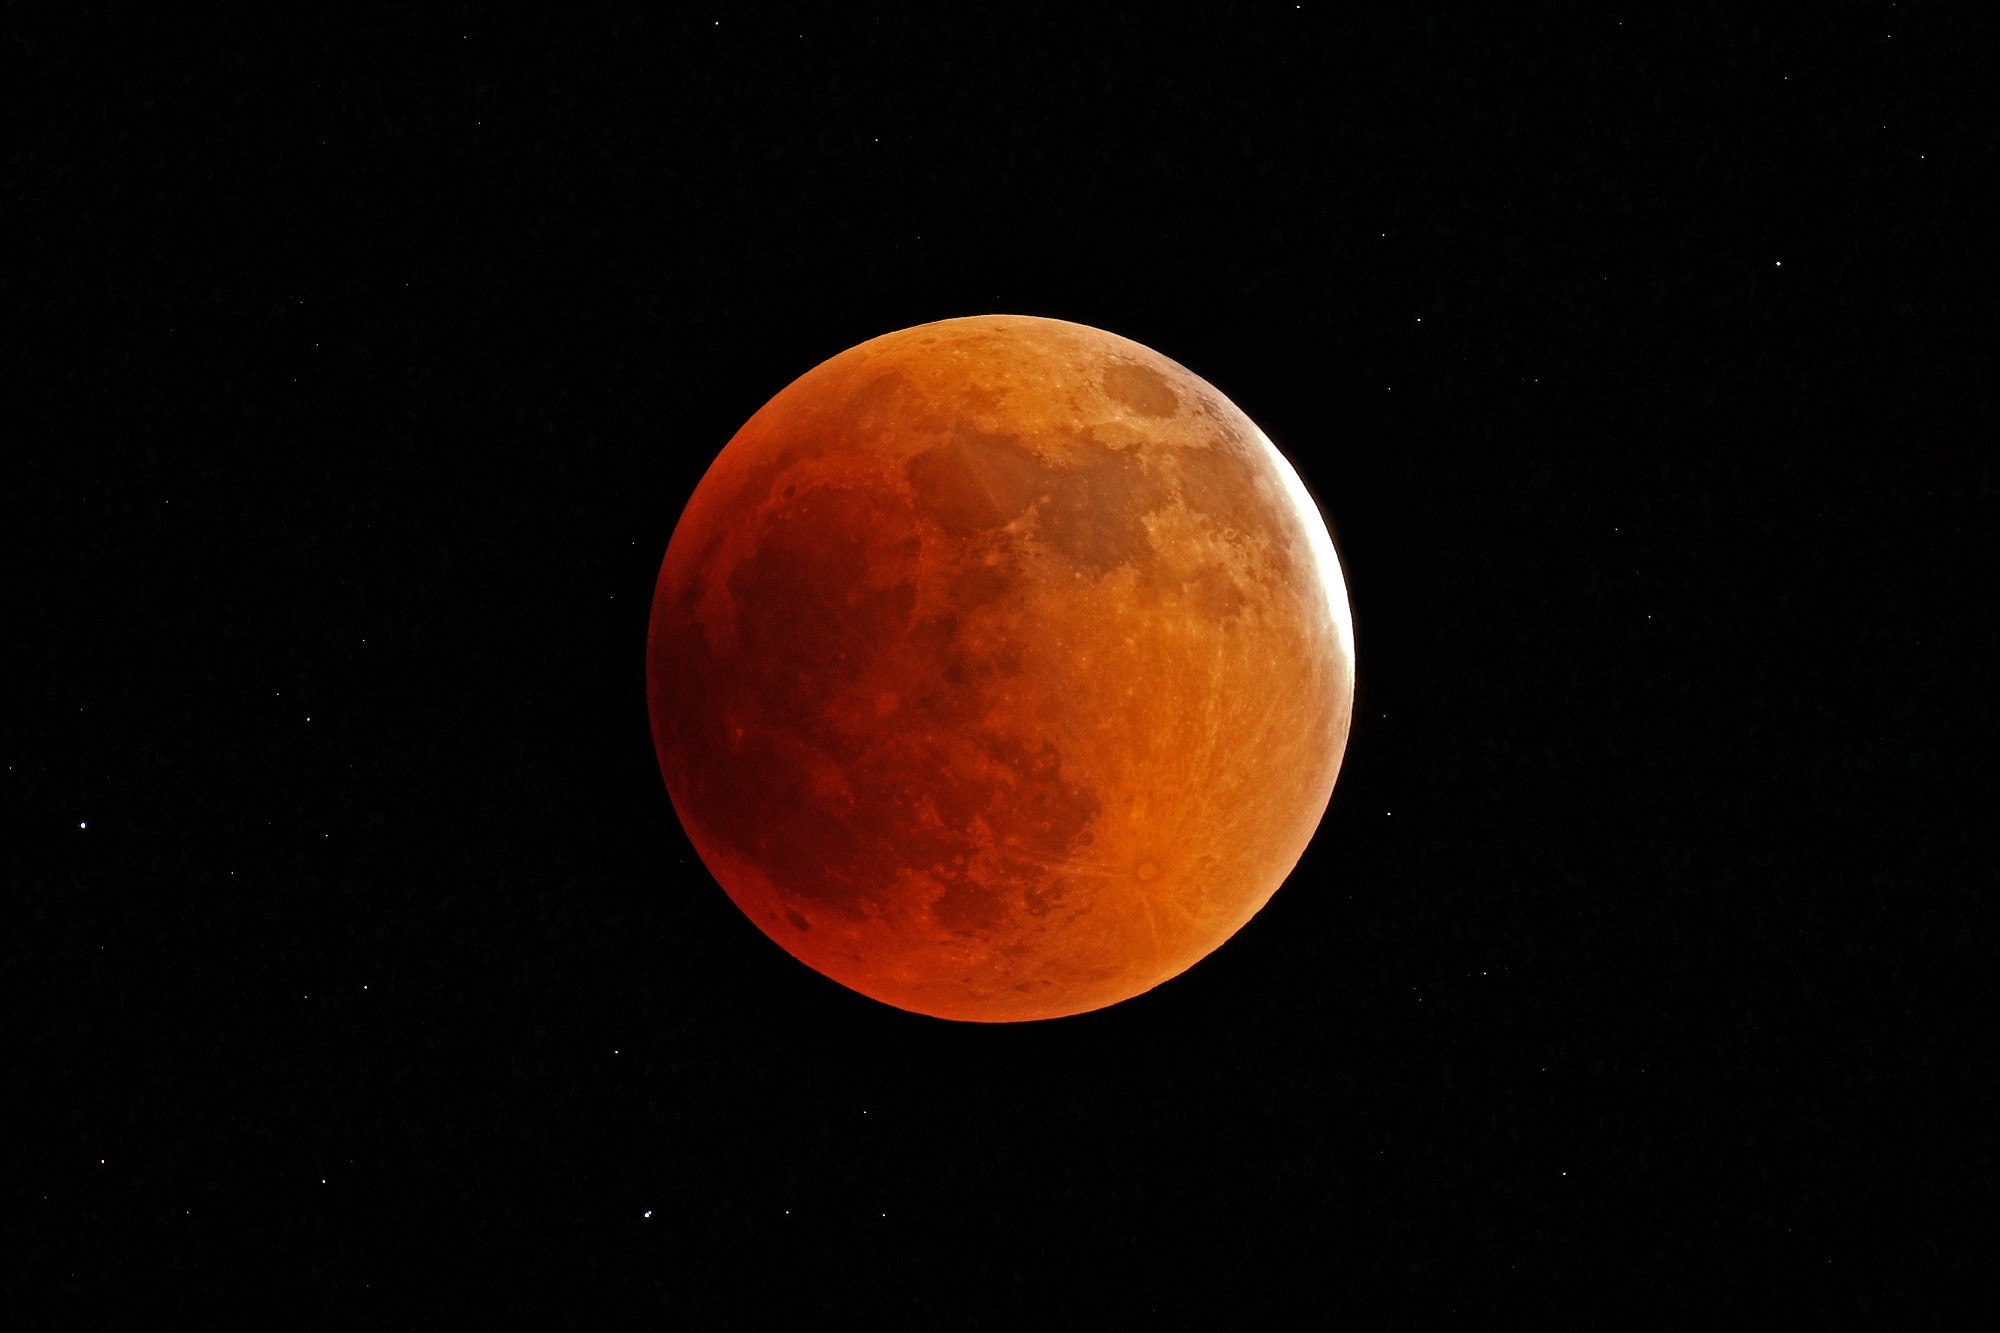 [May 2022 Lunar Eclipse Near Totality]